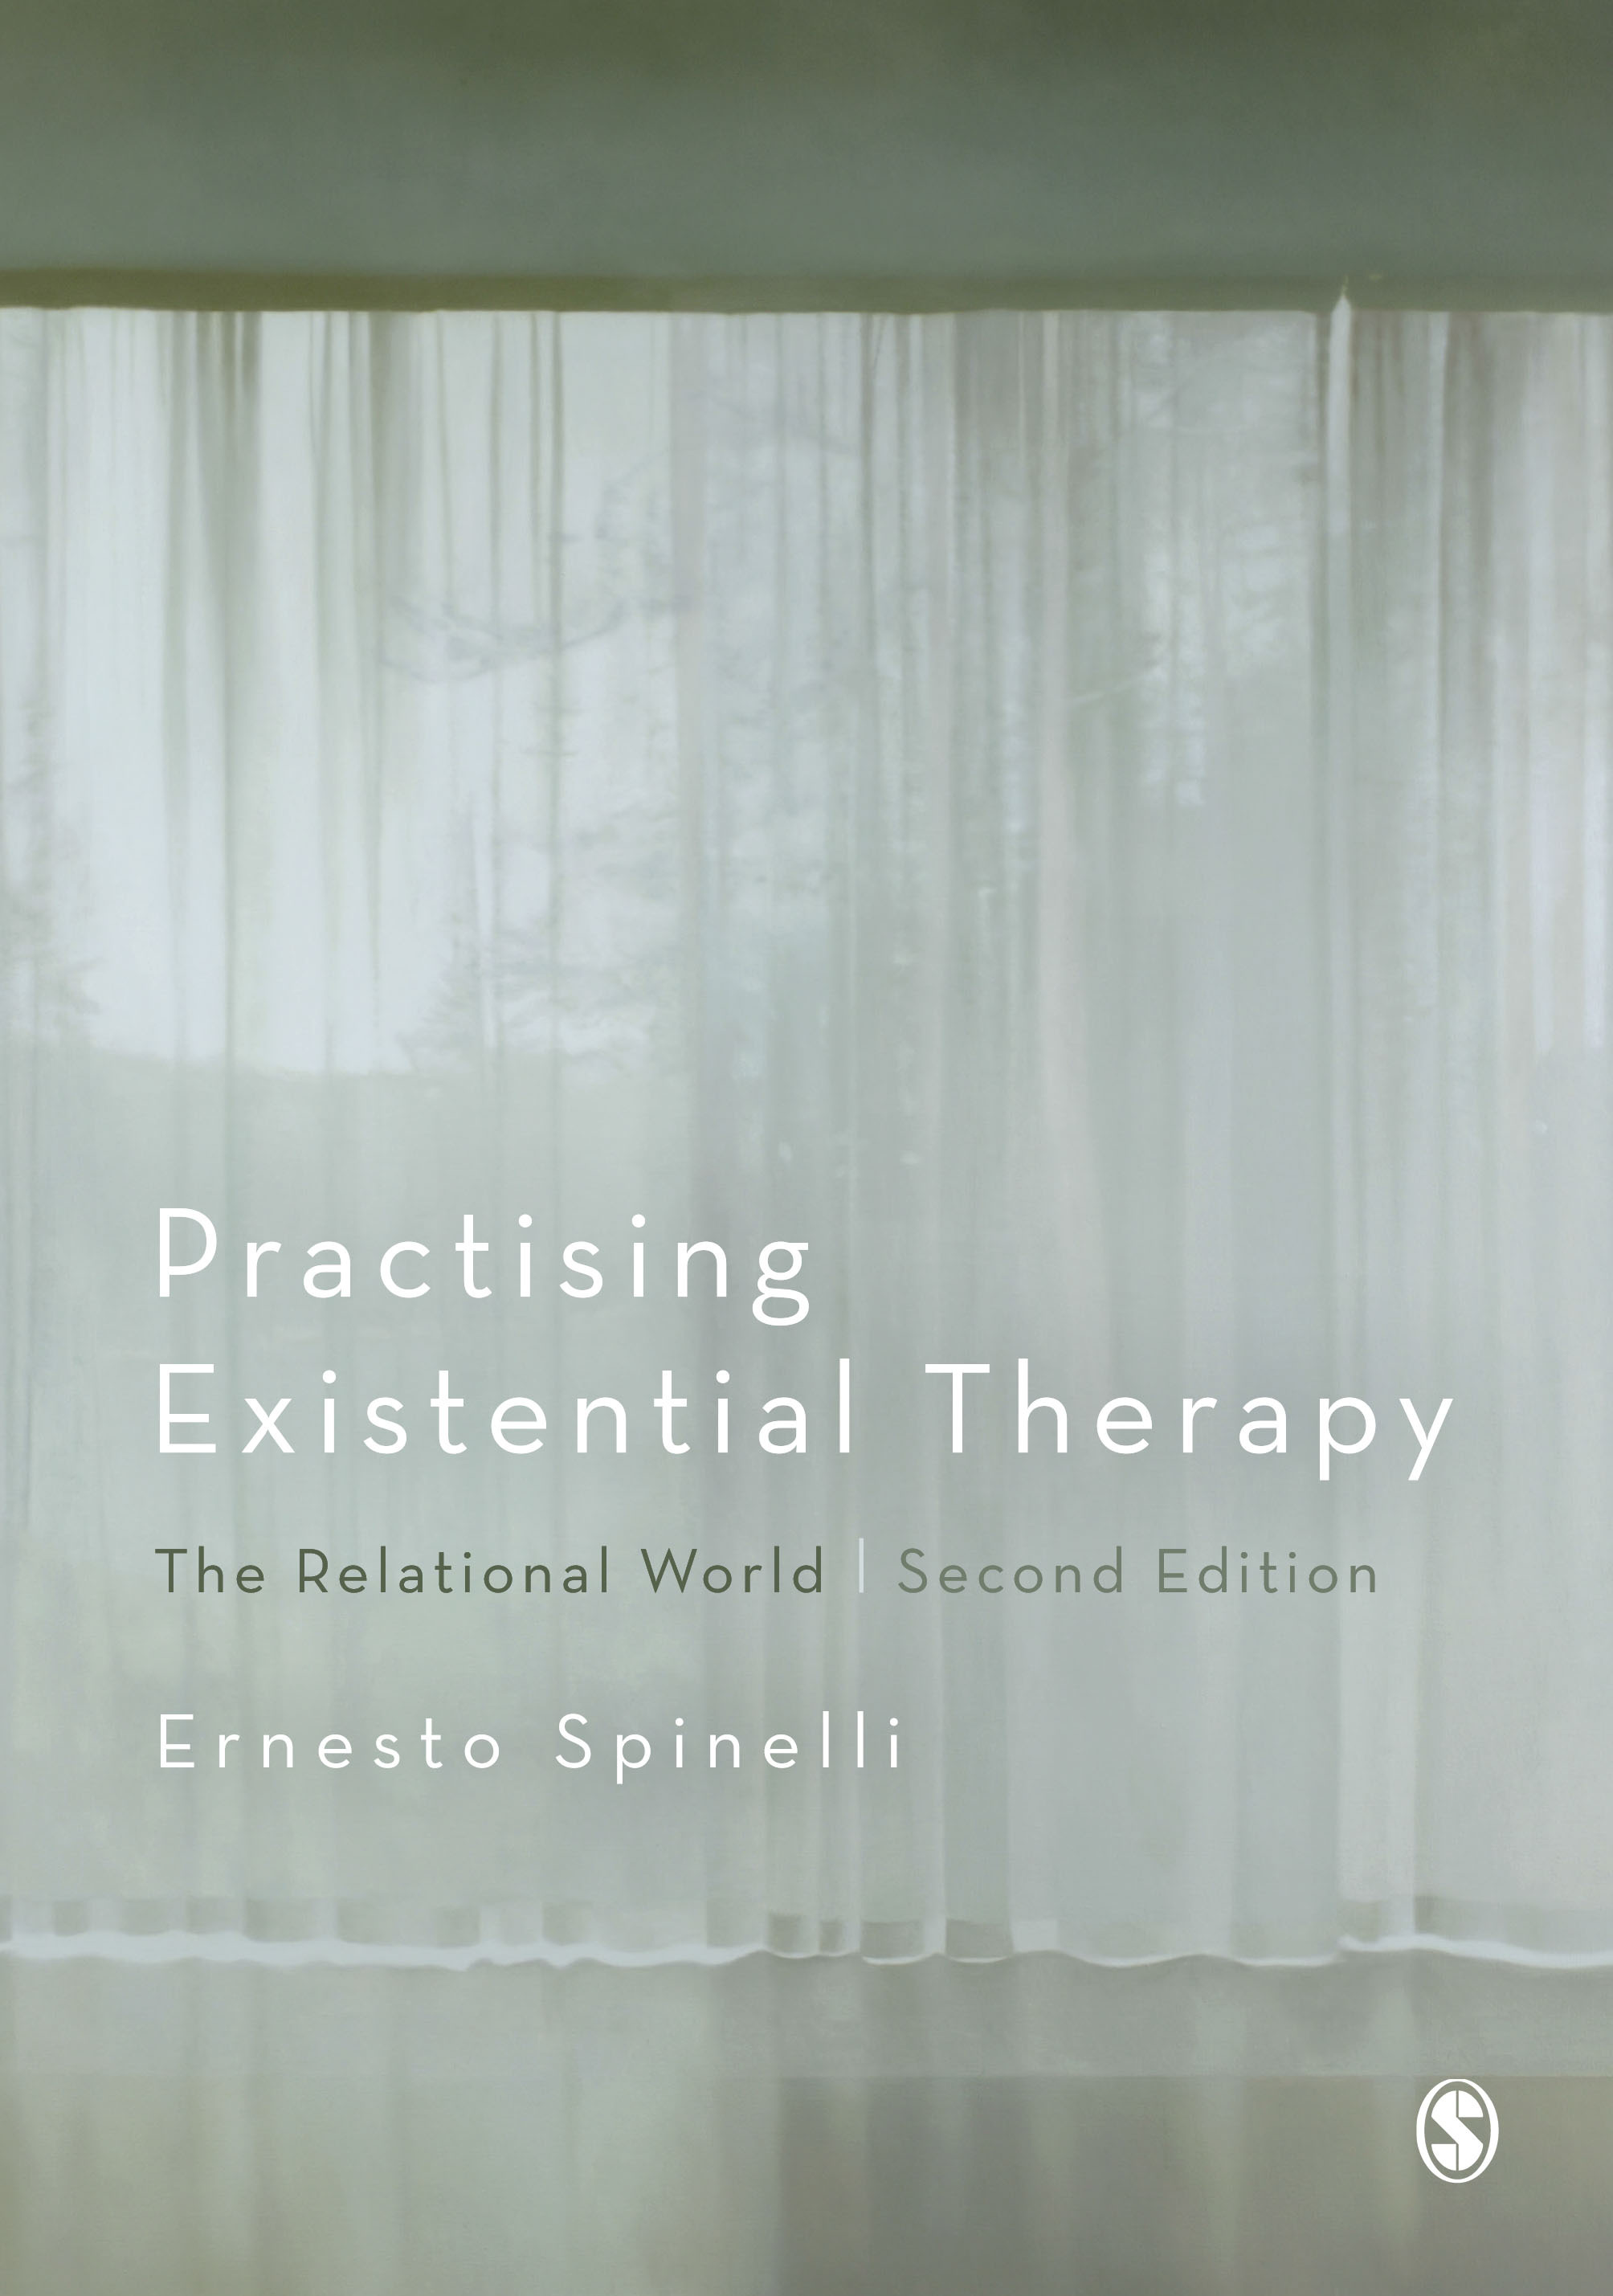 Practising Existential Therapy book cover